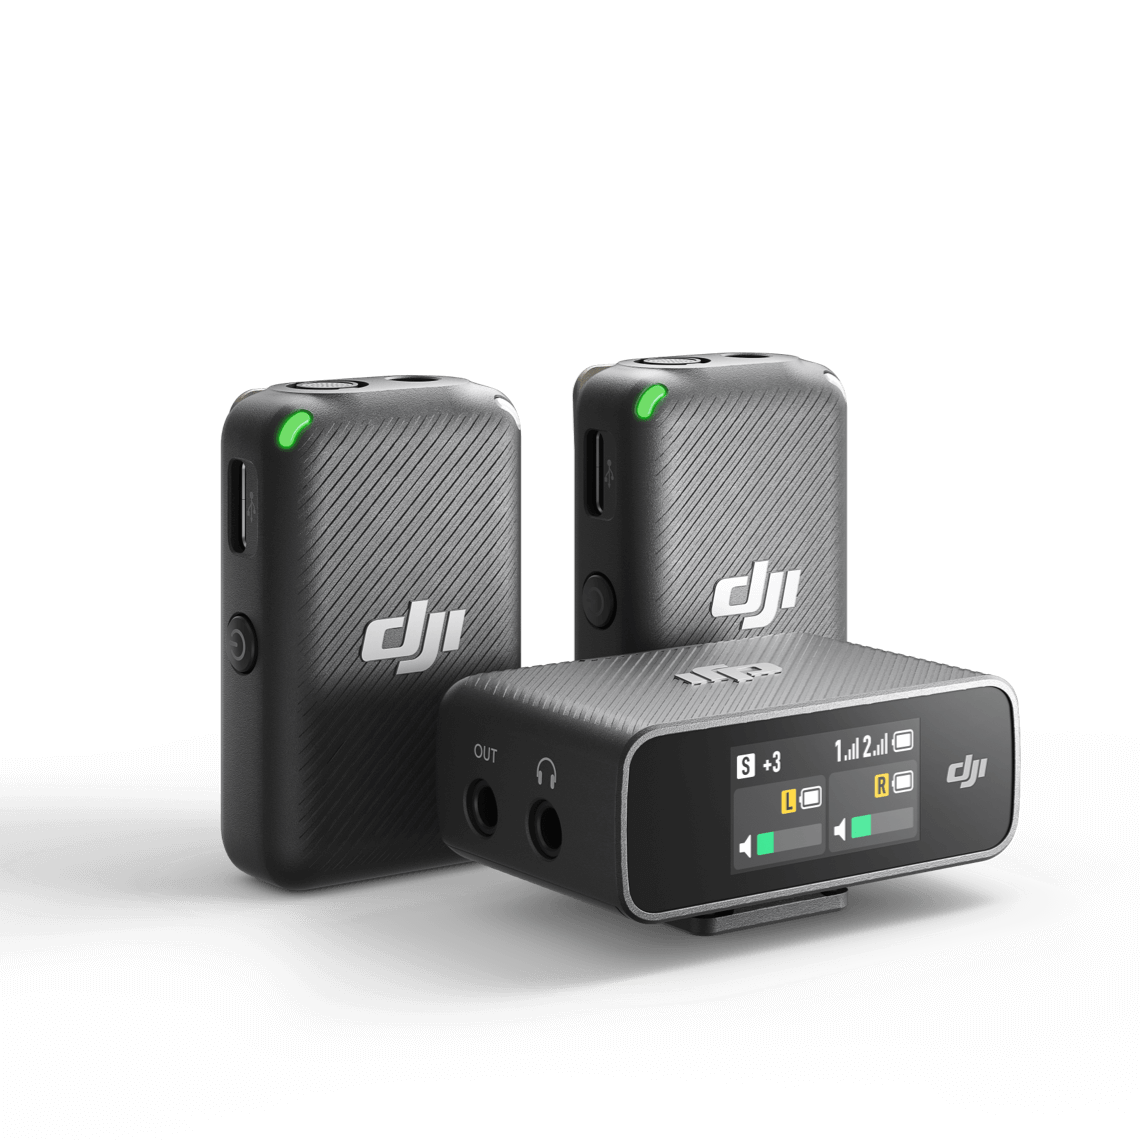 Product Image of DJI Mic Wireless Microphone Kit - (2Tx + 1Rx) Includes 2 Transmitters, 1 Receiver and Charging Case